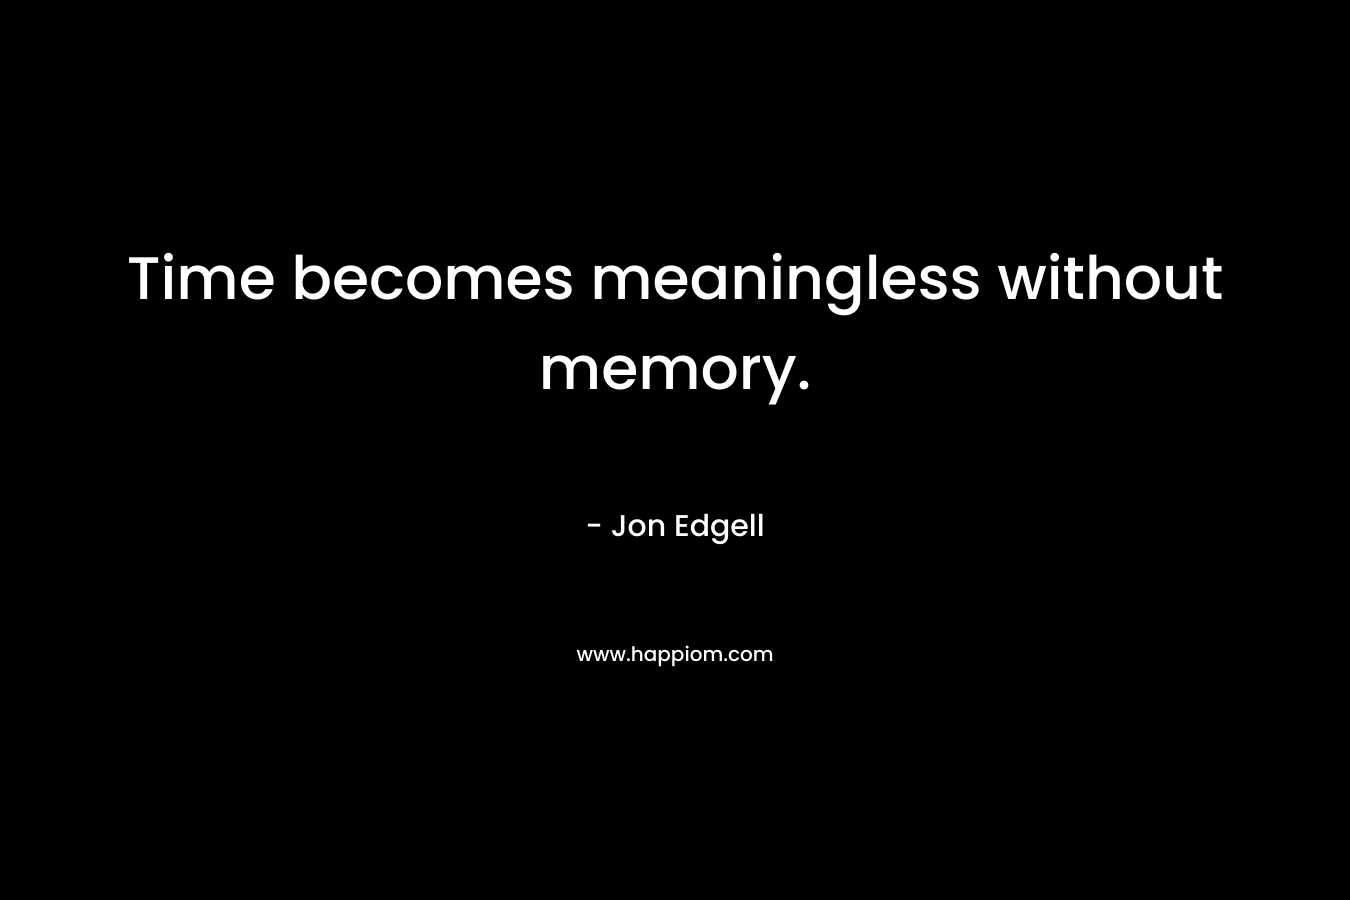 Time becomes meaningless without memory.